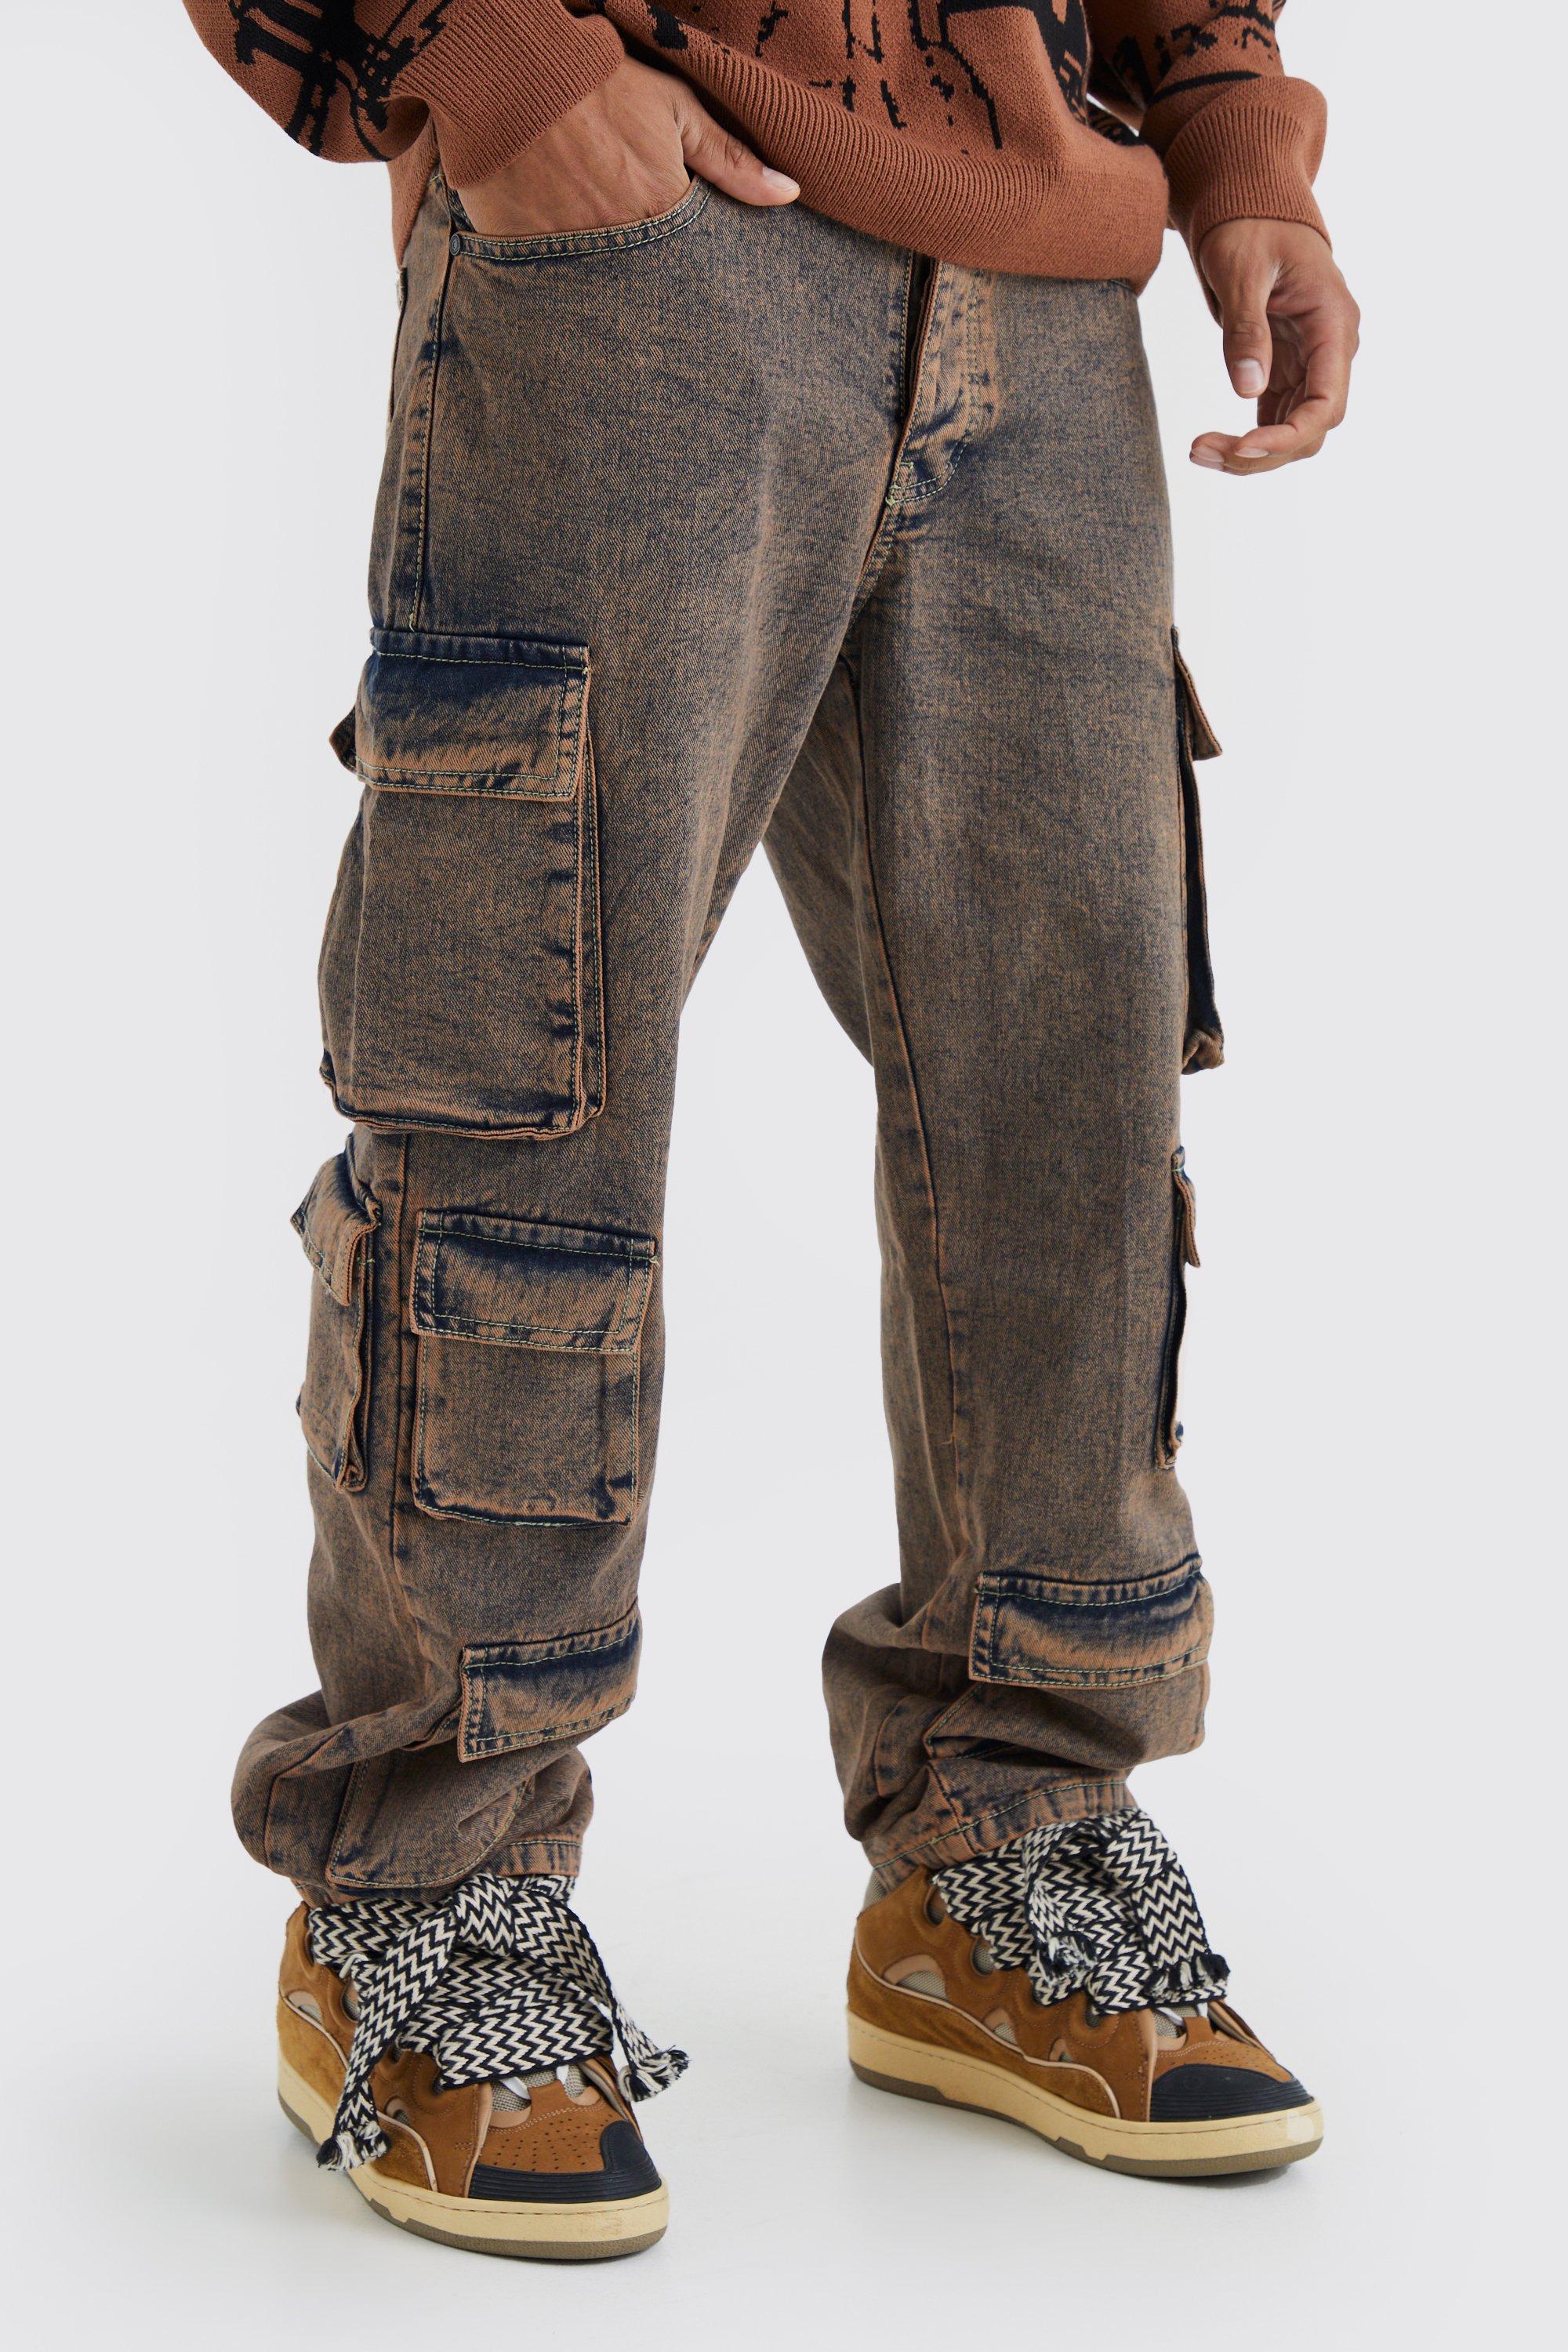 boohooMAN Baggy Fit Acid Wash Cargo Jeans - Size 30R